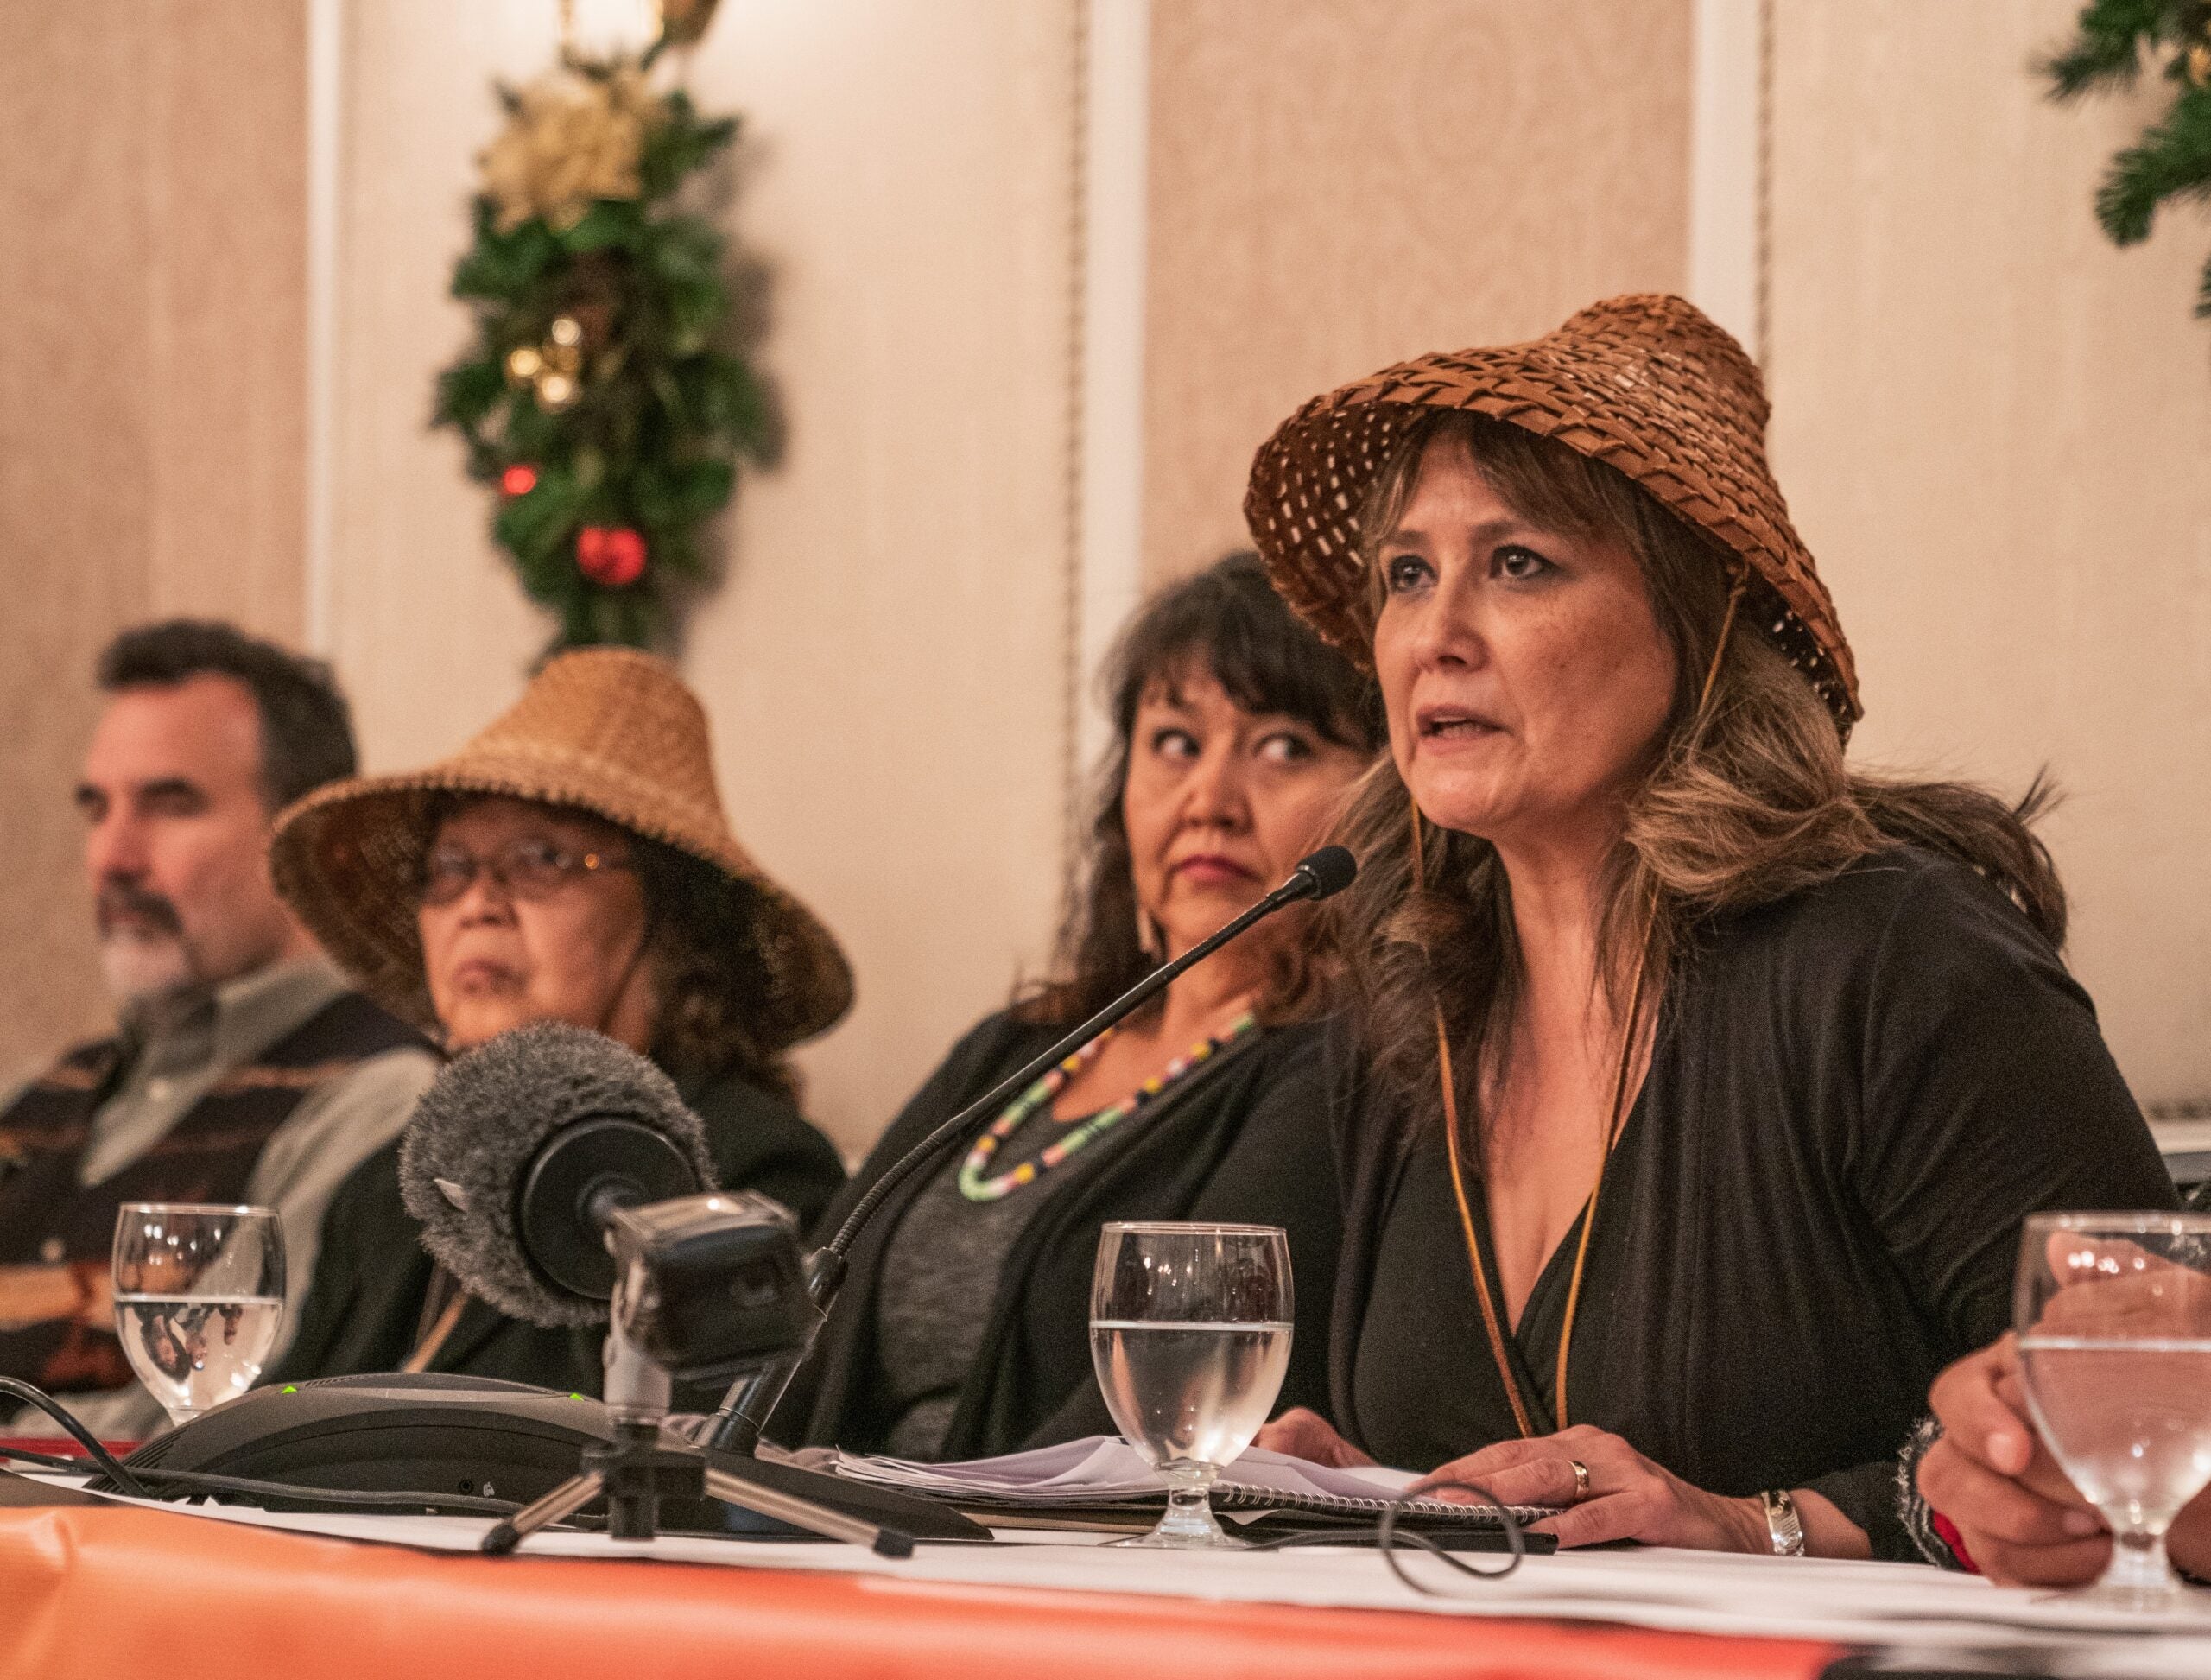 Lisa Wilson of the Lummi Nation speaks at a press conference held before First Nations and the U.S. Coast Salish Tribes addressing the Canadian National Energy Board in Victoria, British Columbia.
(Alex Harris for Earthjustice)